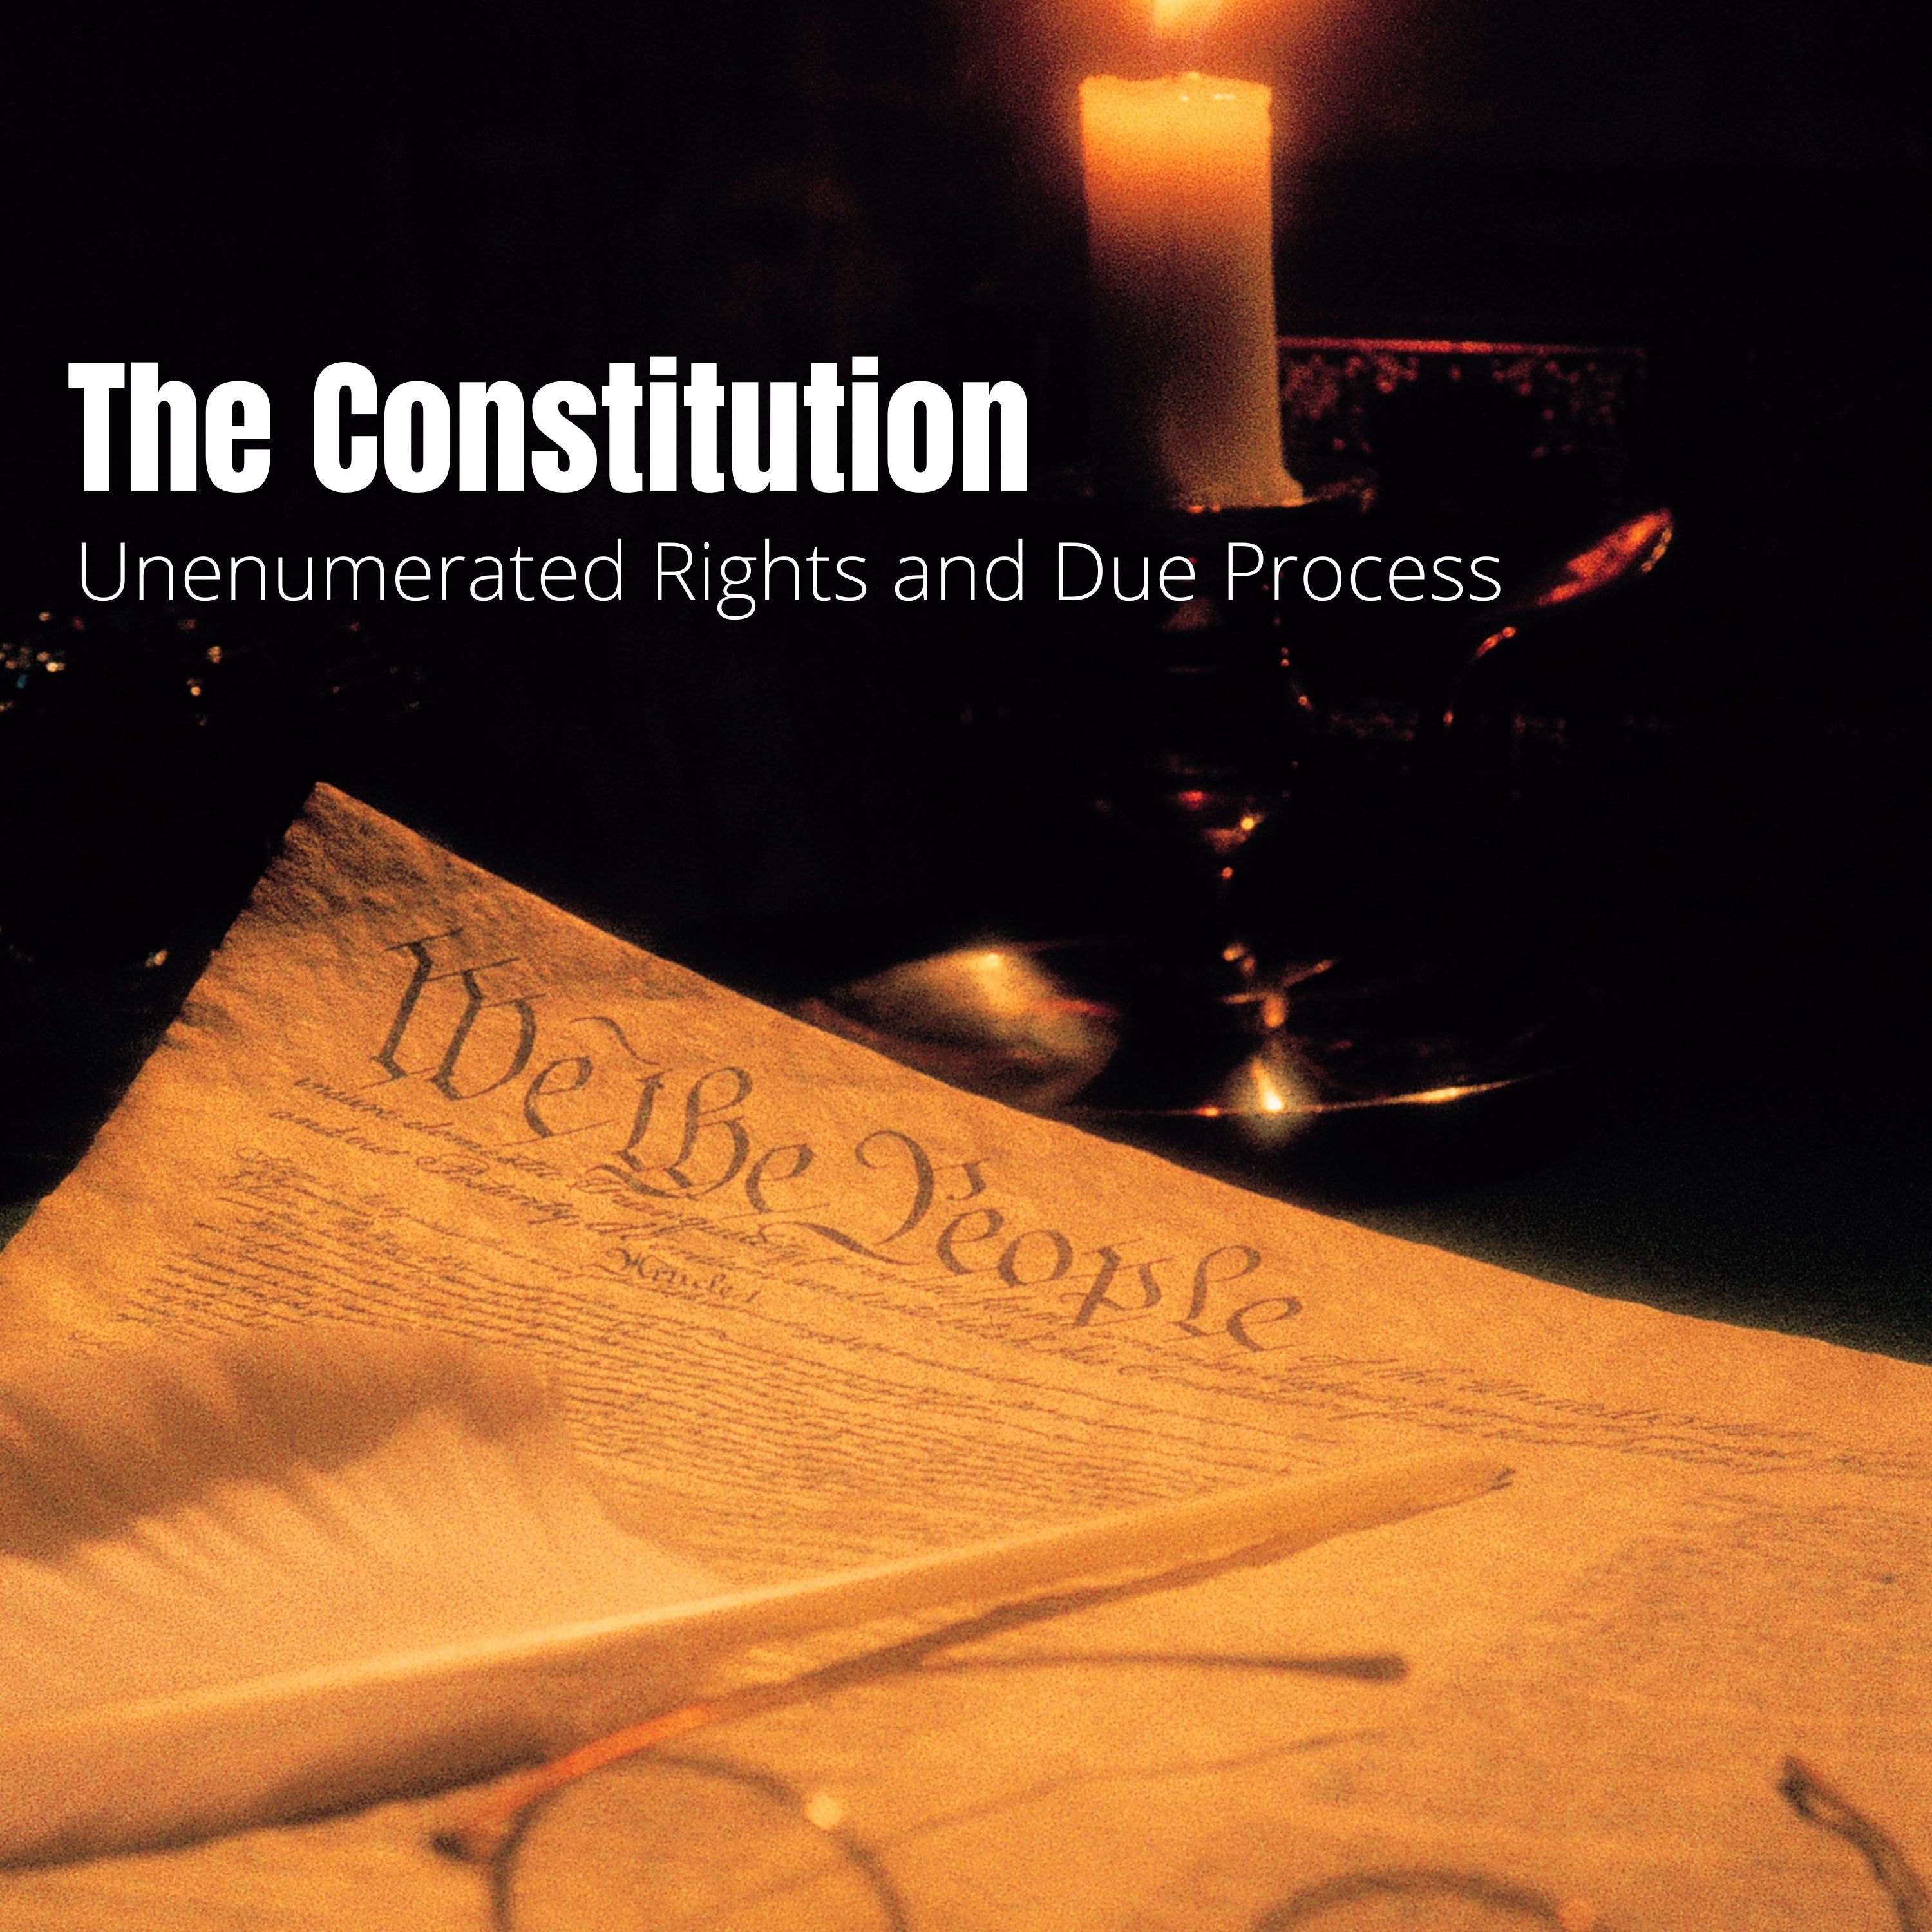 Constitutional Law - Lecture Six: Unenumerated Rights and Due Process